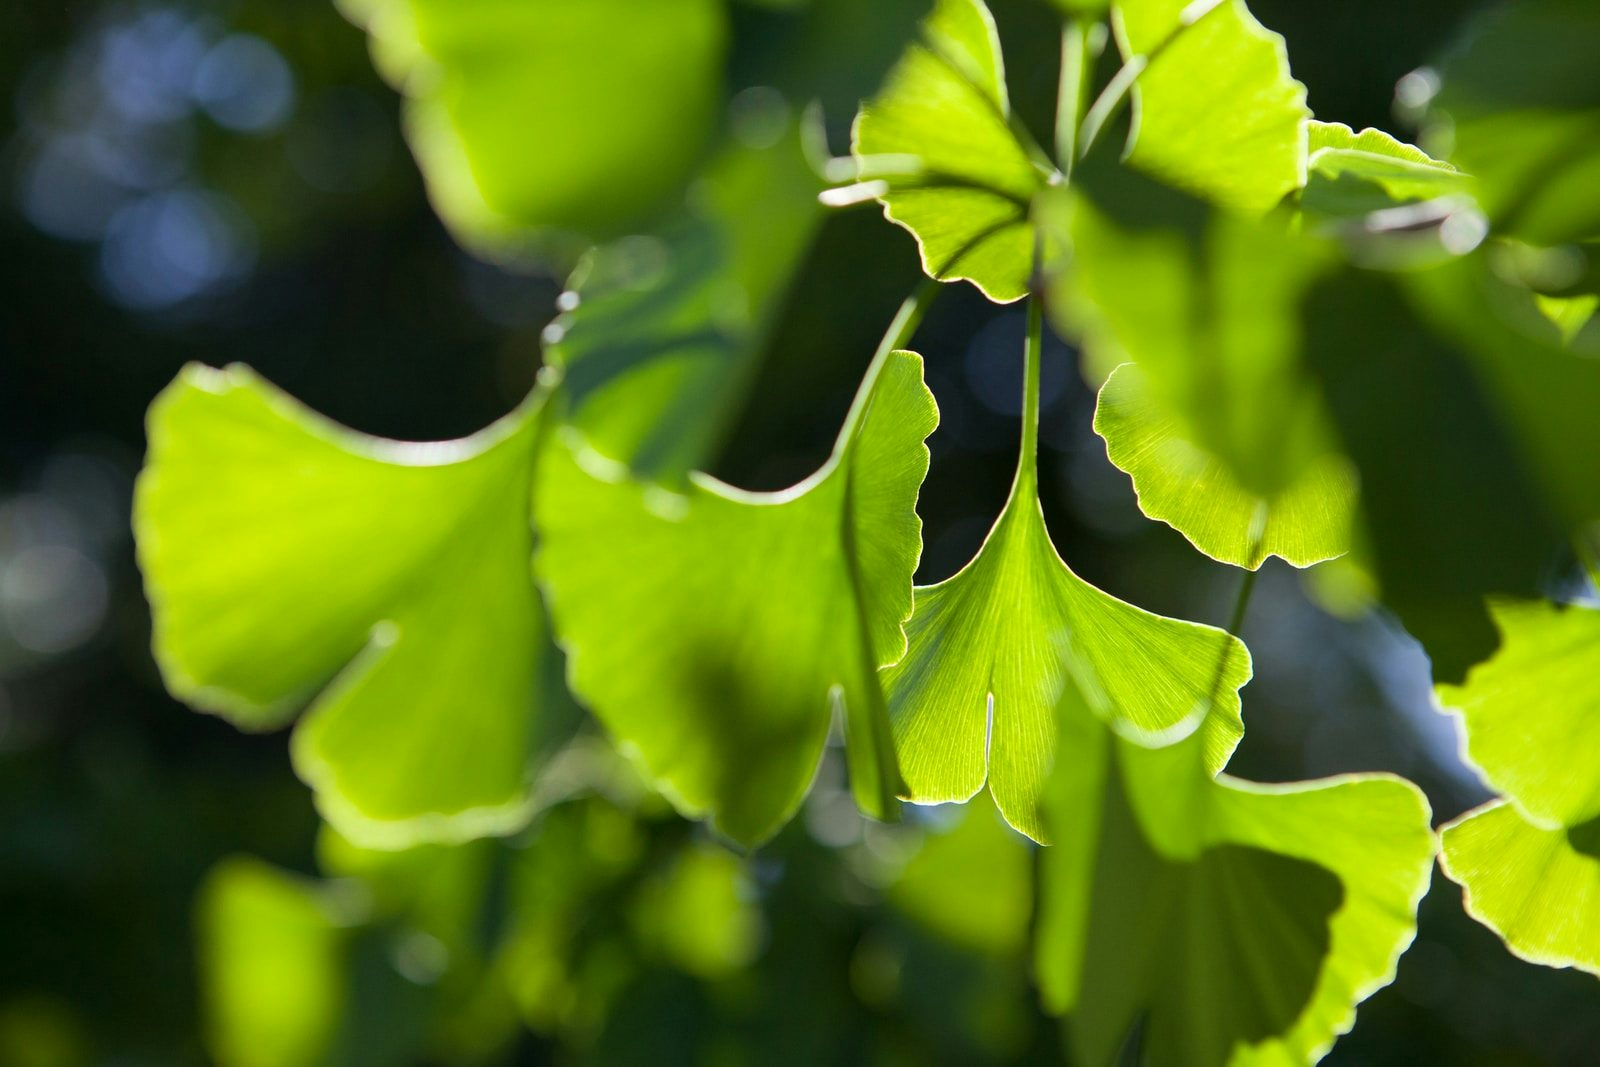 Let's make ginkgo extract